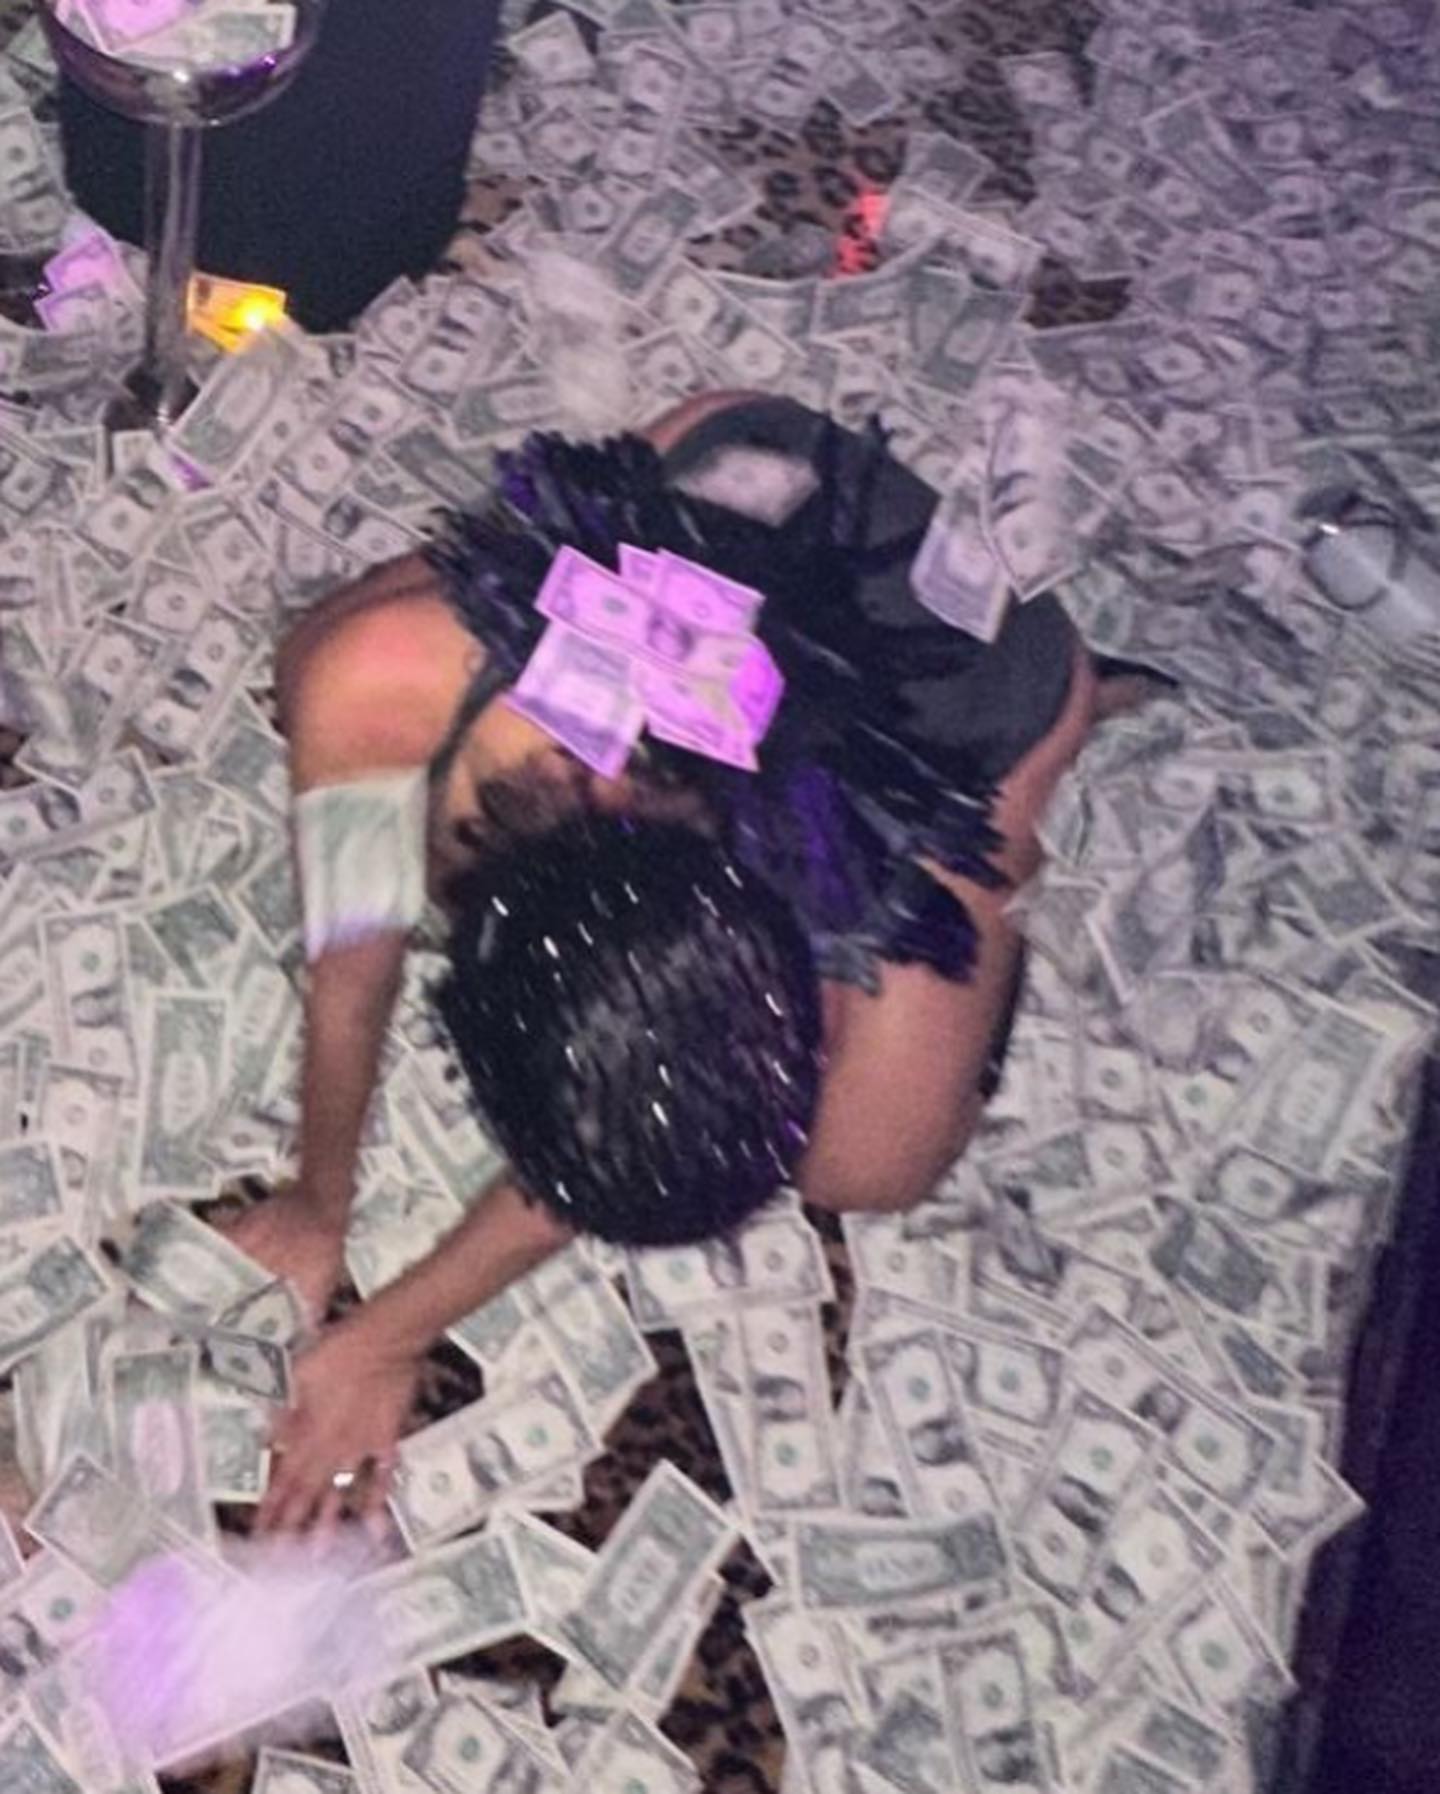 Kanye West's wife was captured rolling in dollar bills during a visit to a strip club